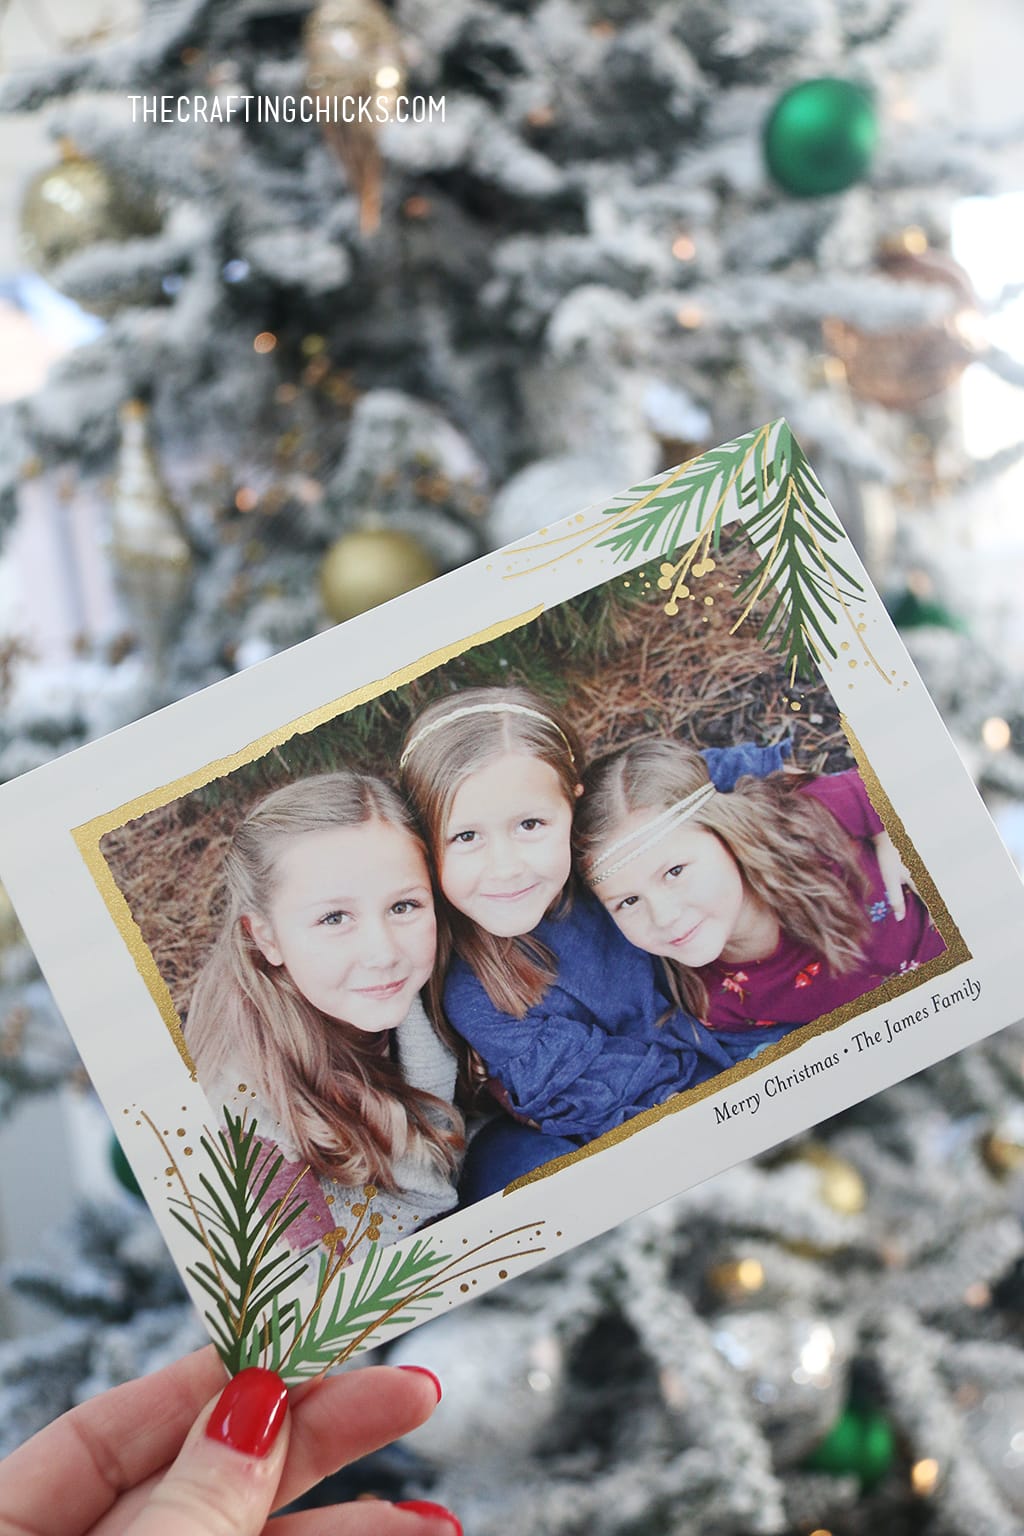 Holiday Photo Cards 2017! Each card was hand picked and made especially for each family. They are custom Christmas cards with foil printing. We think you'll love them as much as we do.